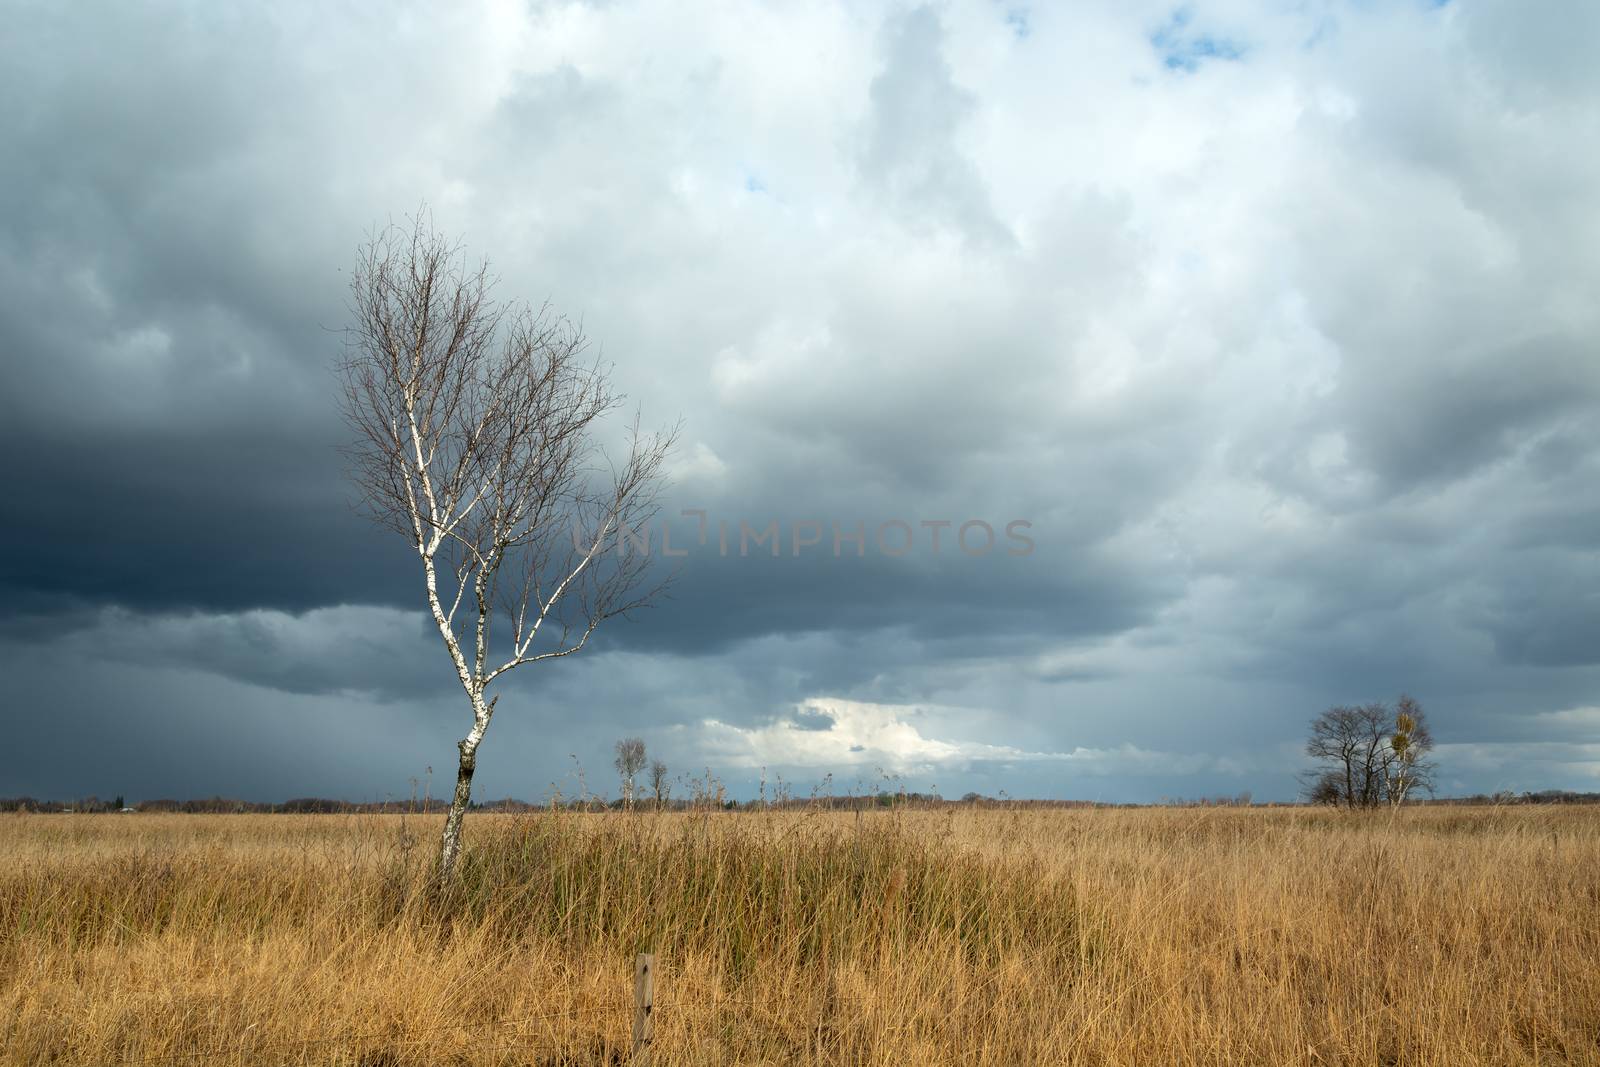 Leafless birch in dry meadows and storm clouds by darekb22